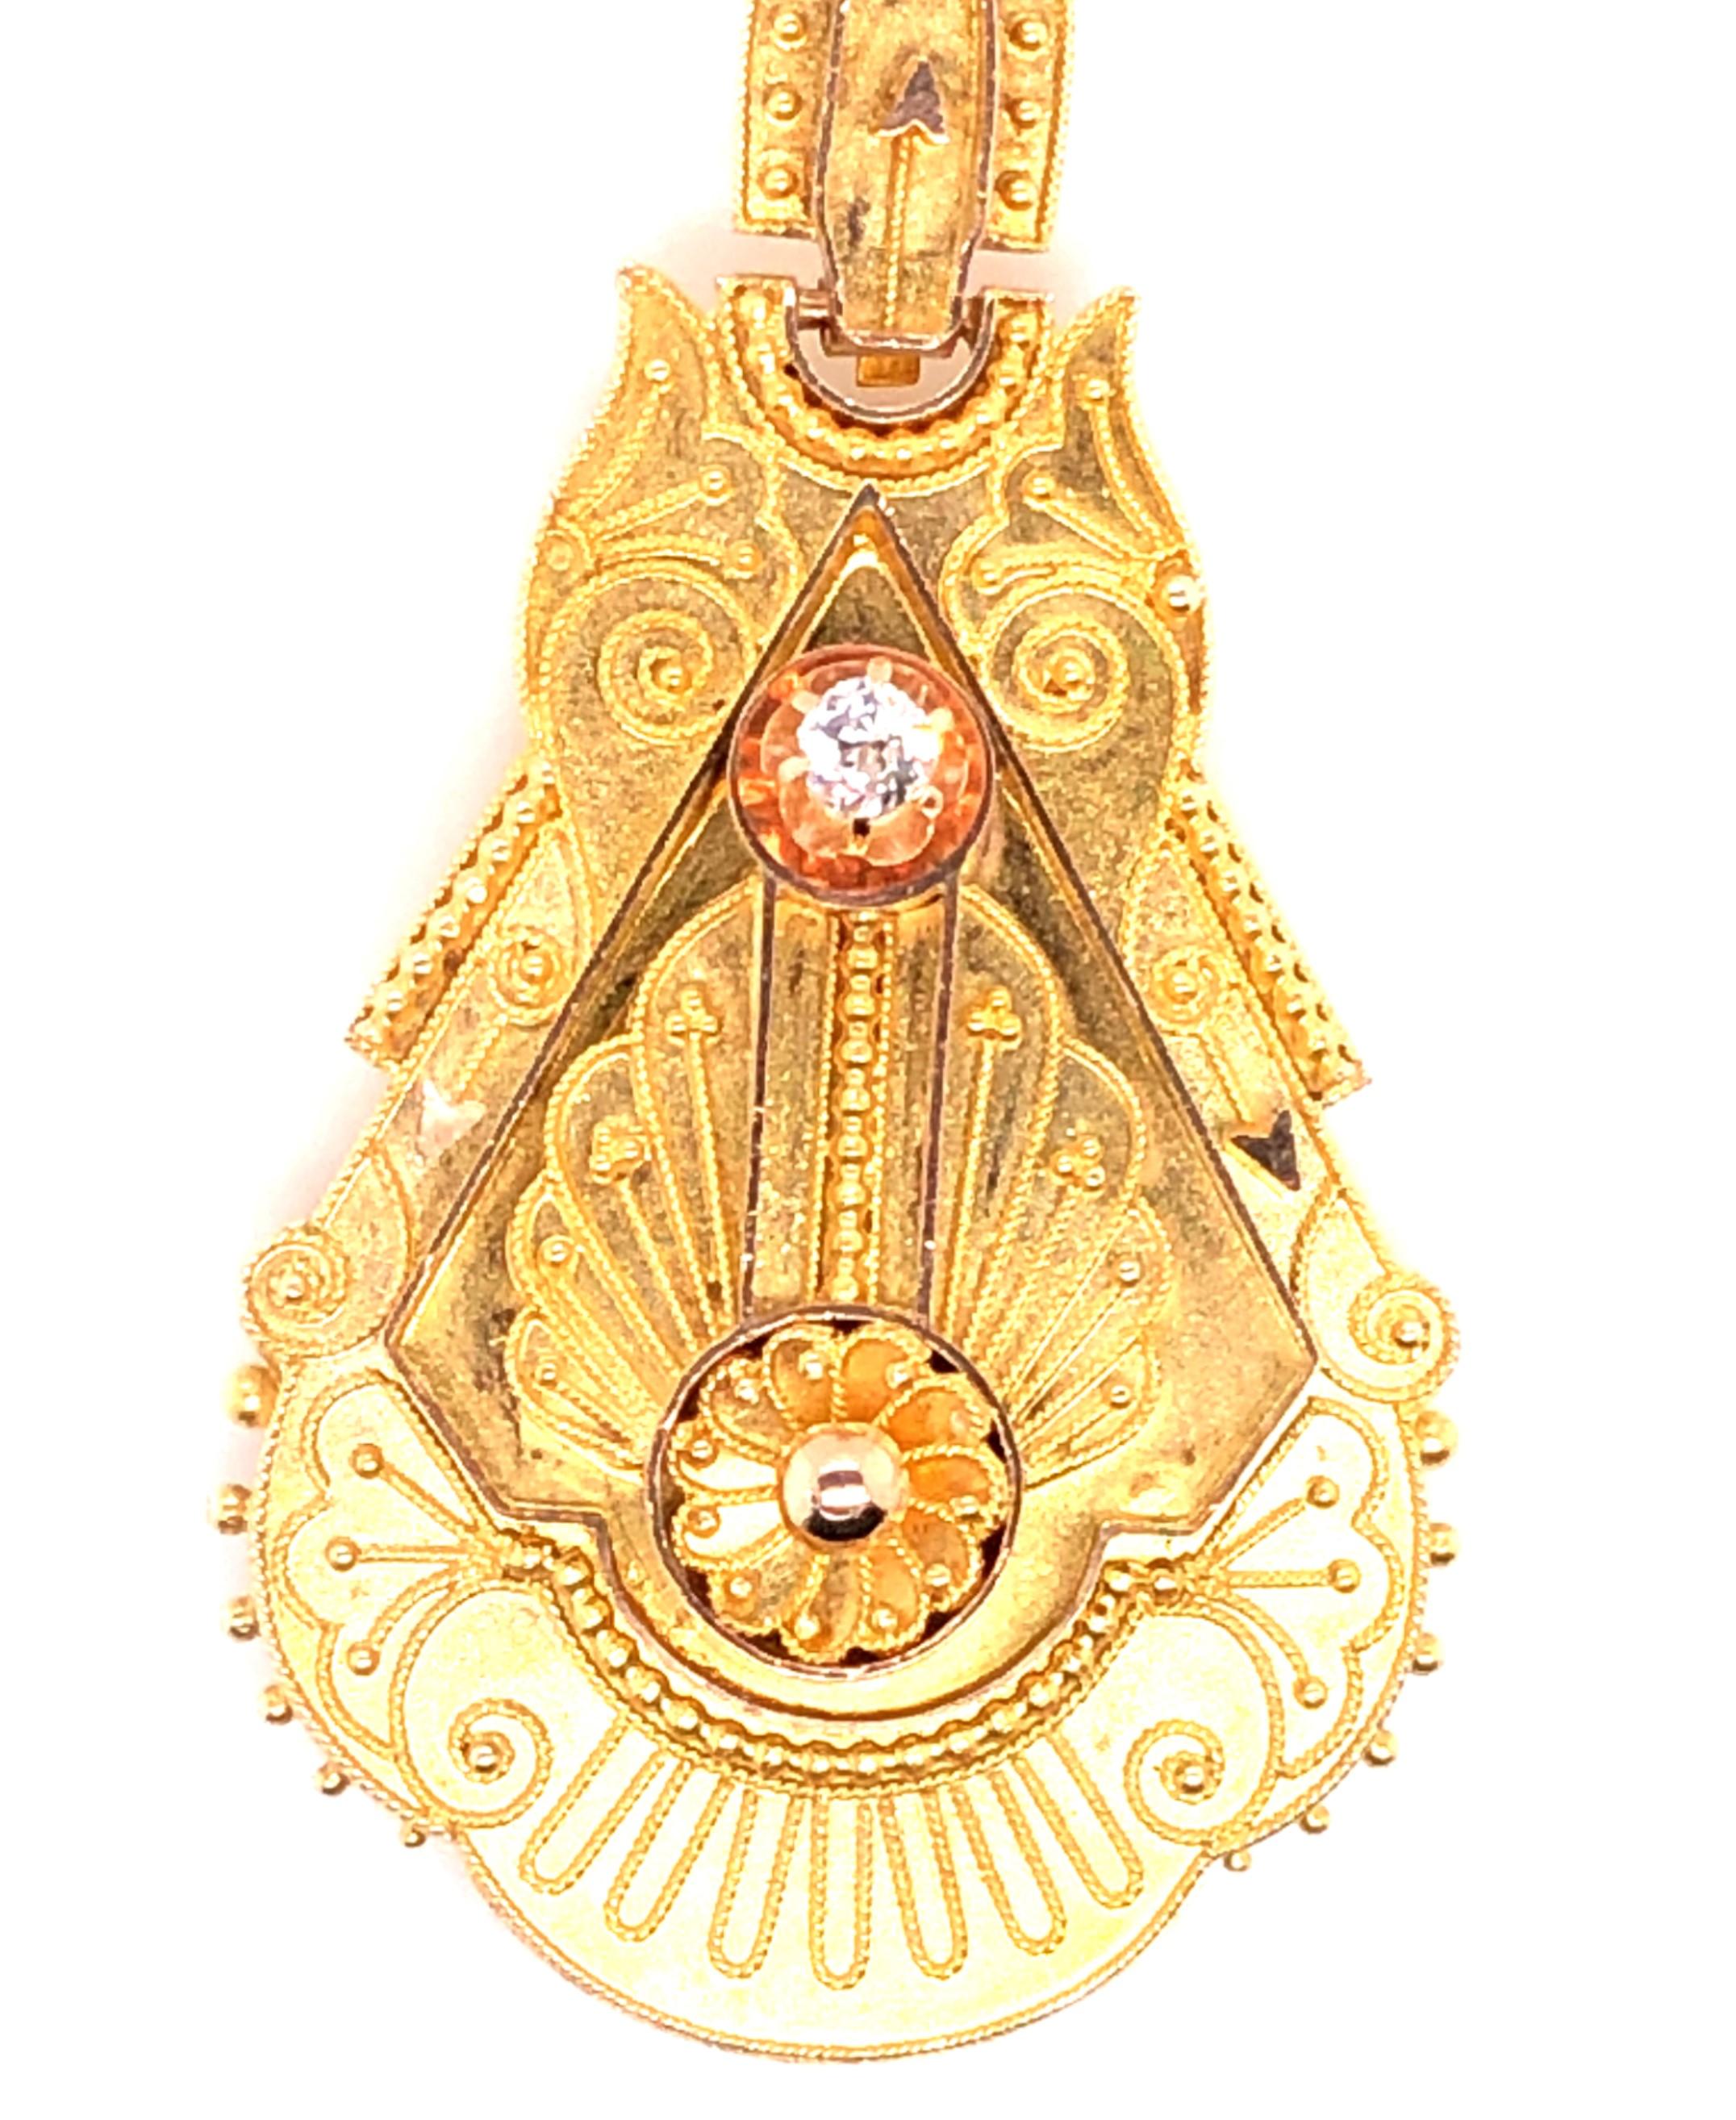 14kt yellow and rose gold Etruscan Revival locket. The Victorian era was filled with various revival movements where ancient styles were given a new sense of fashion. This Etruscan Revival locket is one of those, based on the archaeological finds